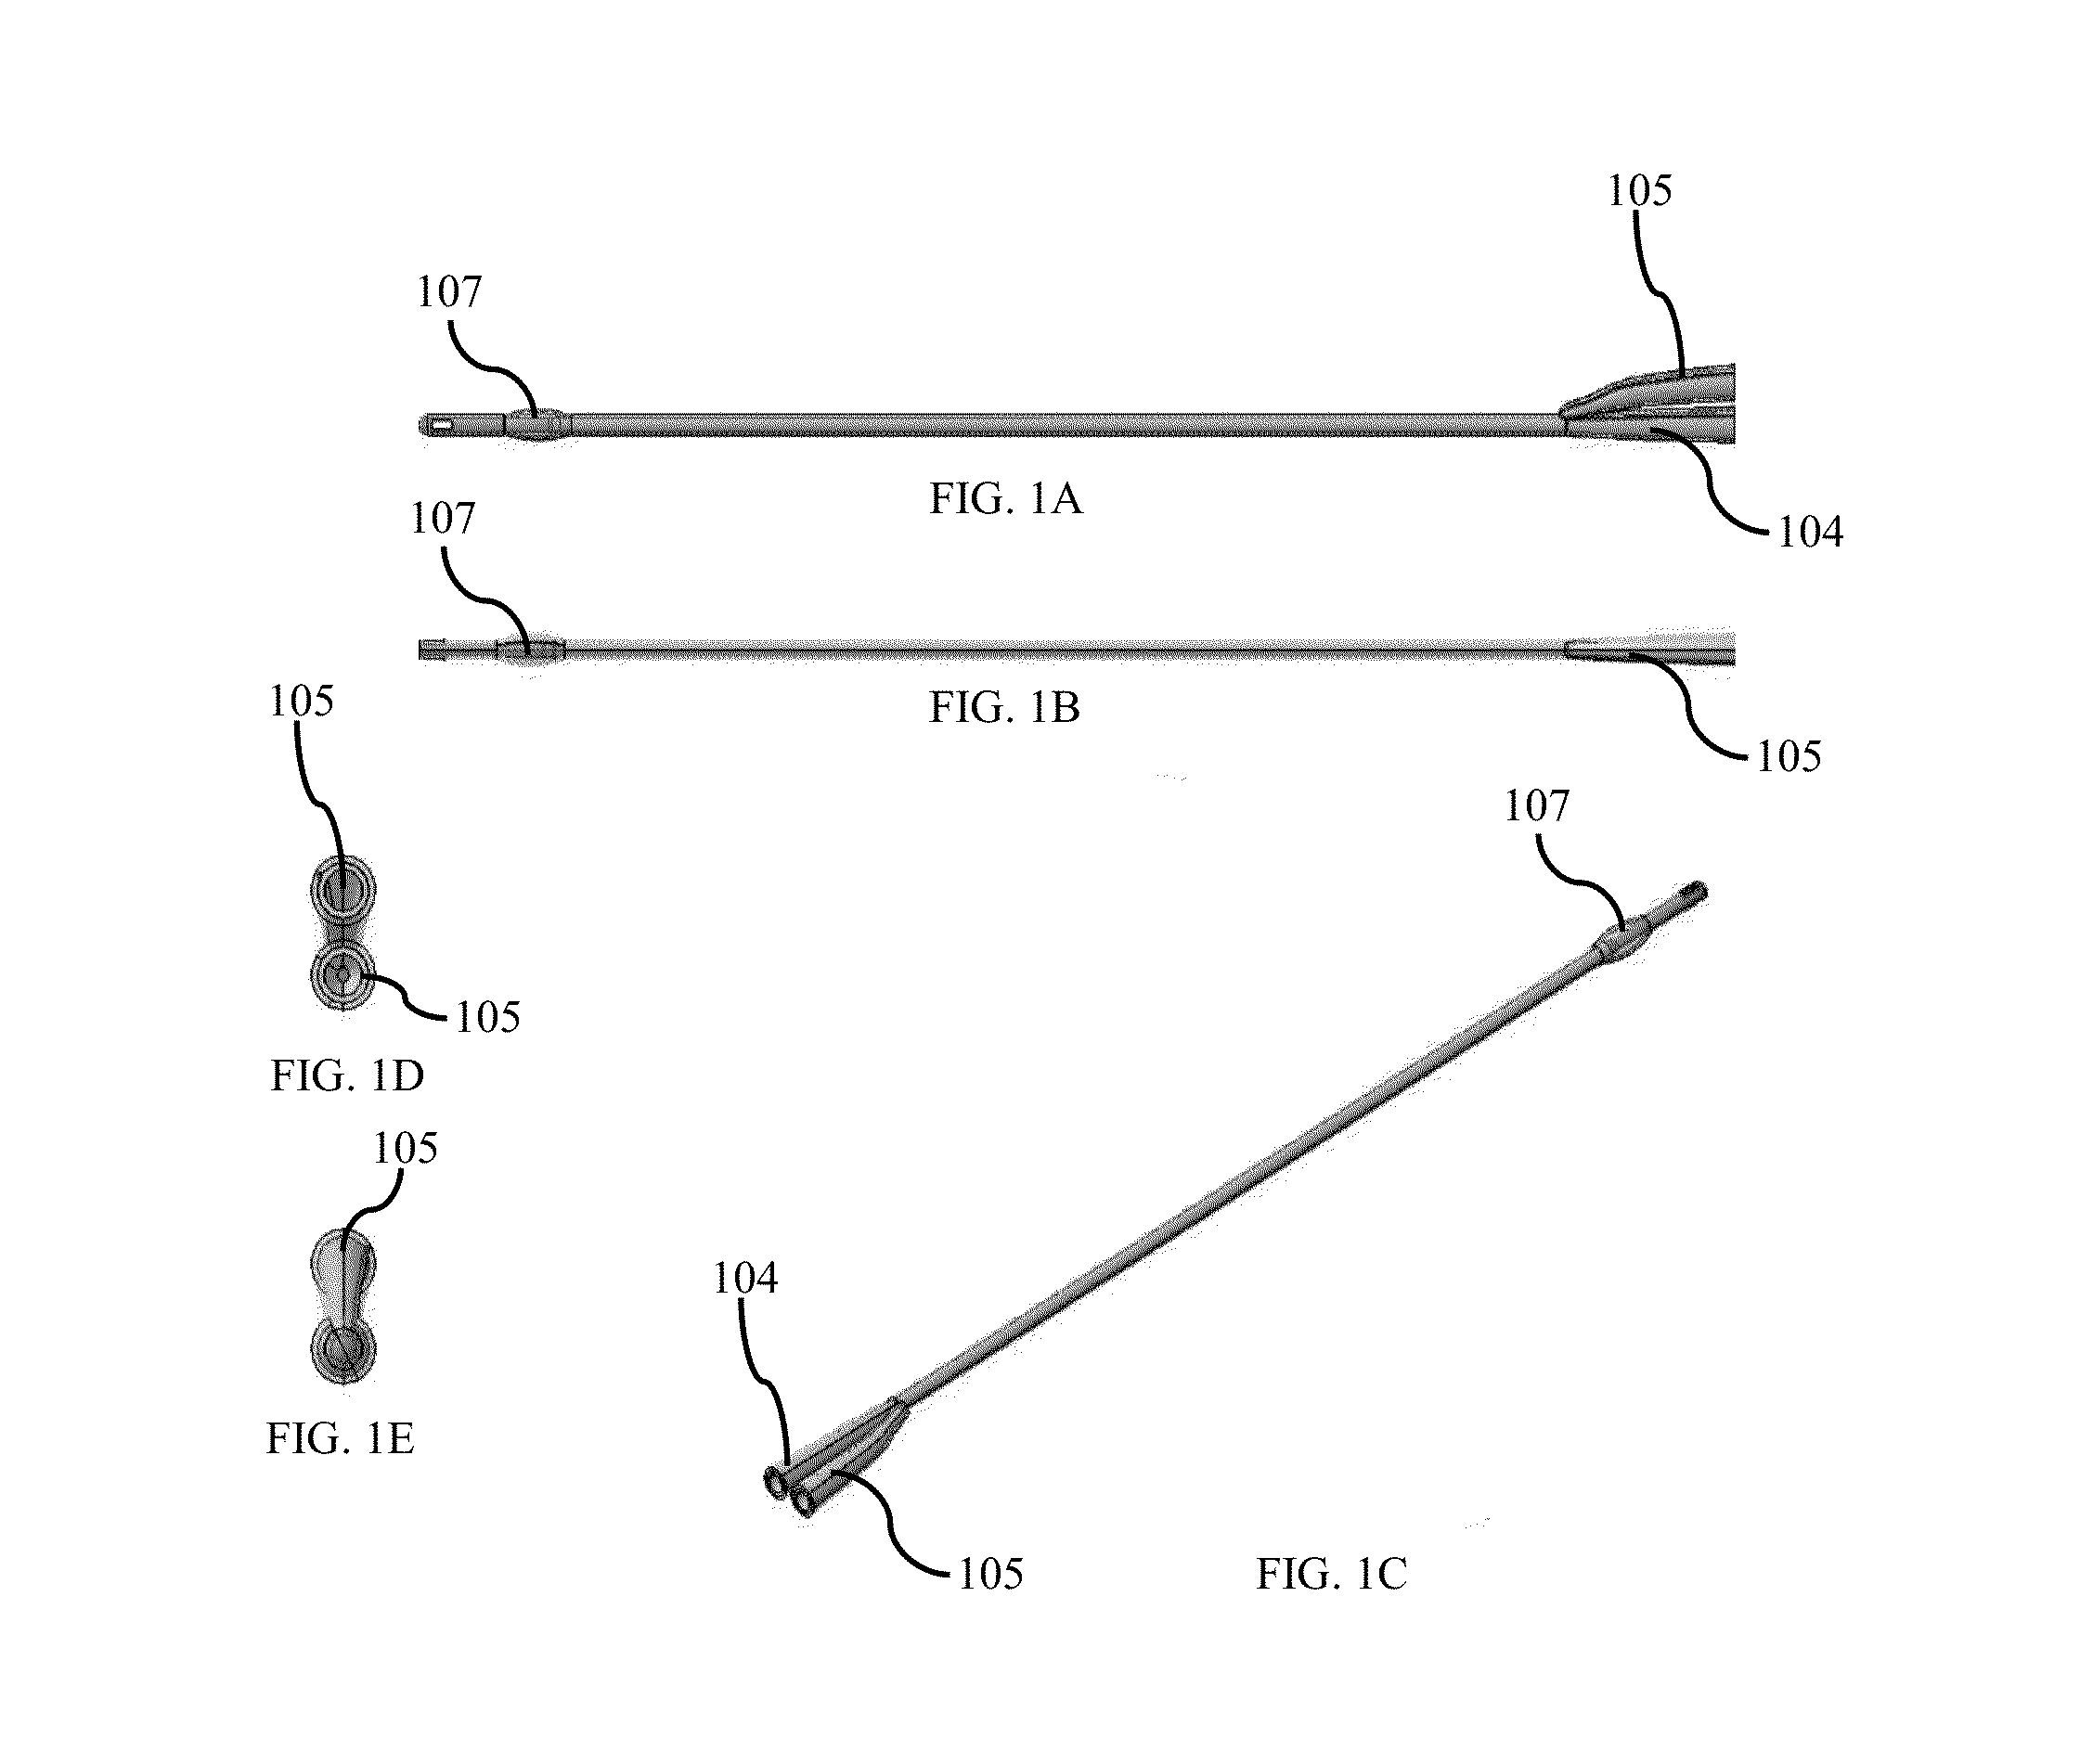 System and method for urinary catheterization